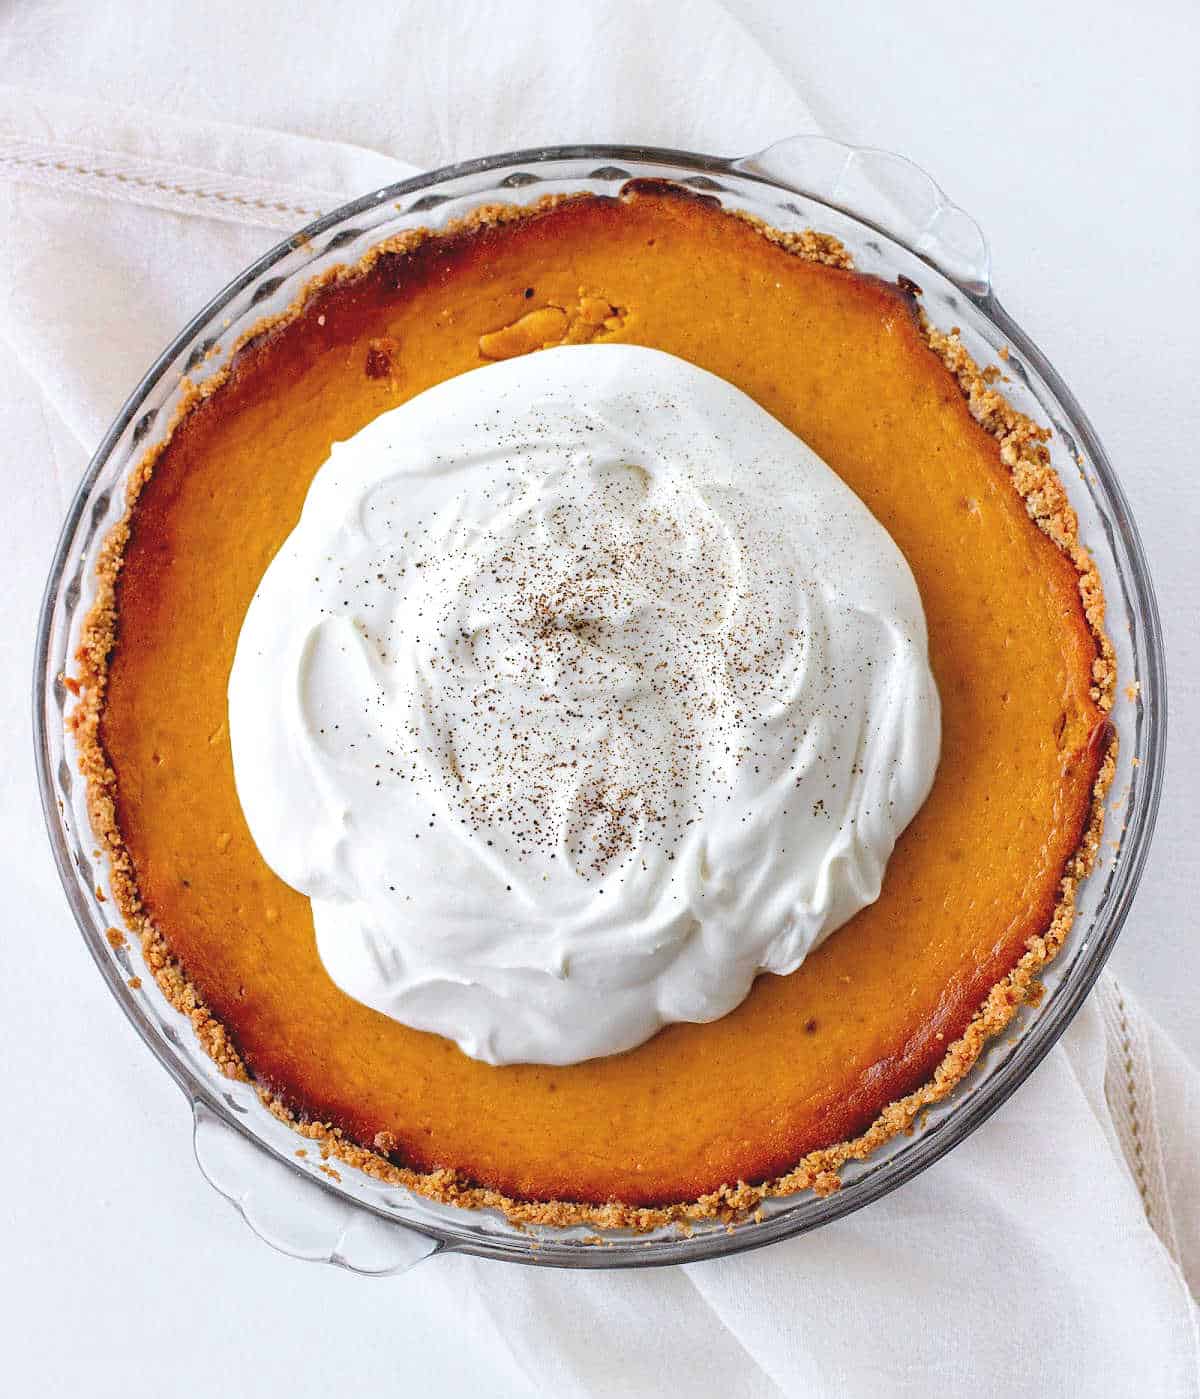 Top view of whole pumpkin pie with cream on top on a glass dish. White cloth and surface.